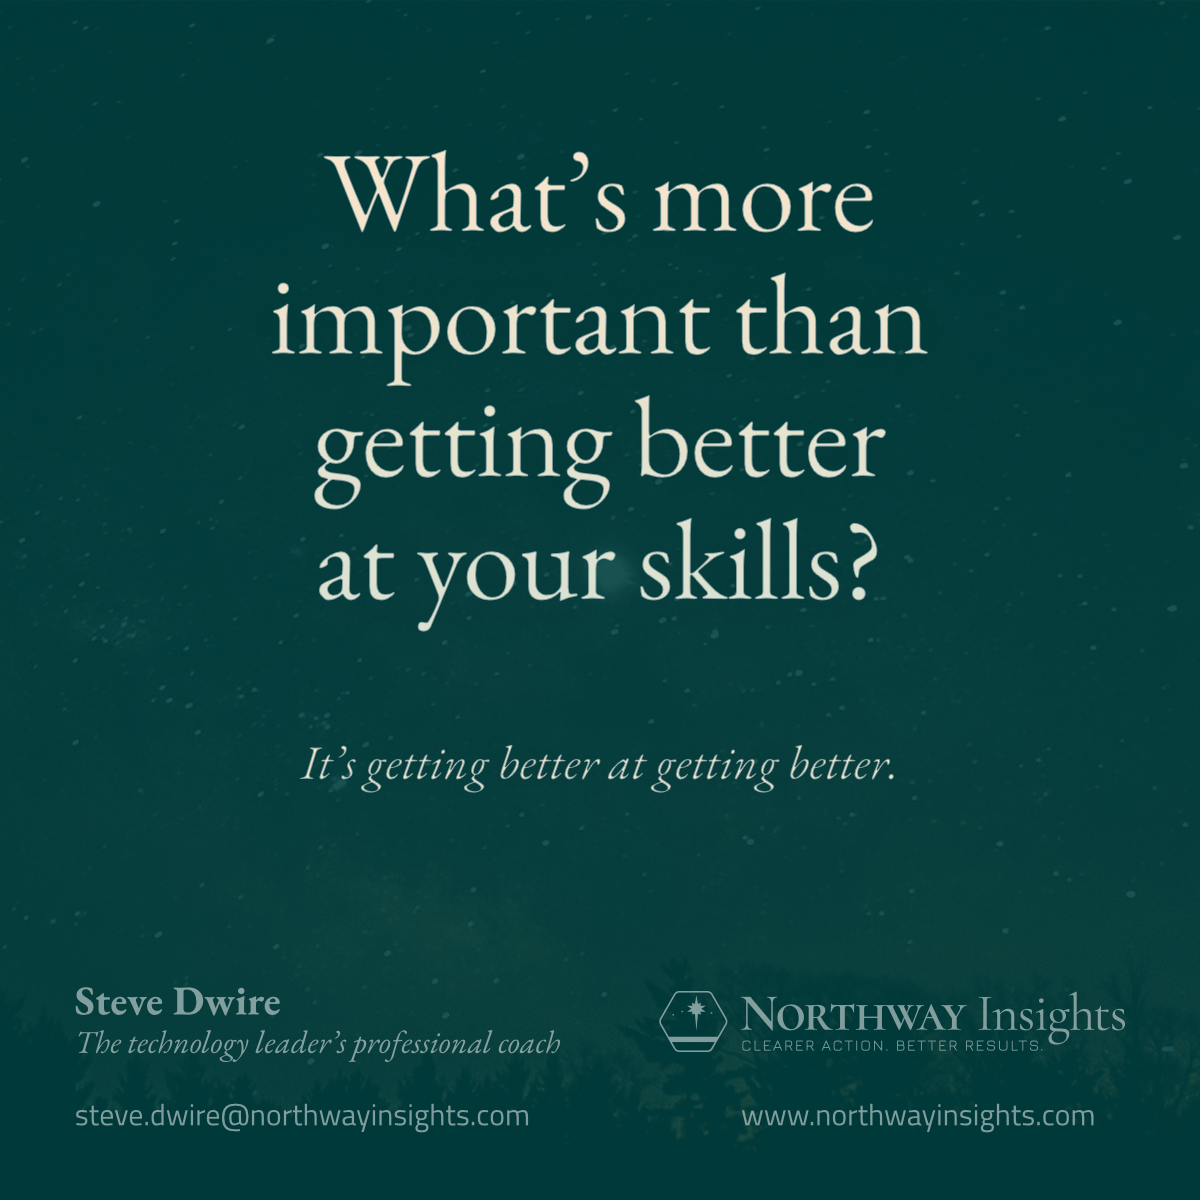 What's more important than getting better at your skills? (It's getting better at getting better.)